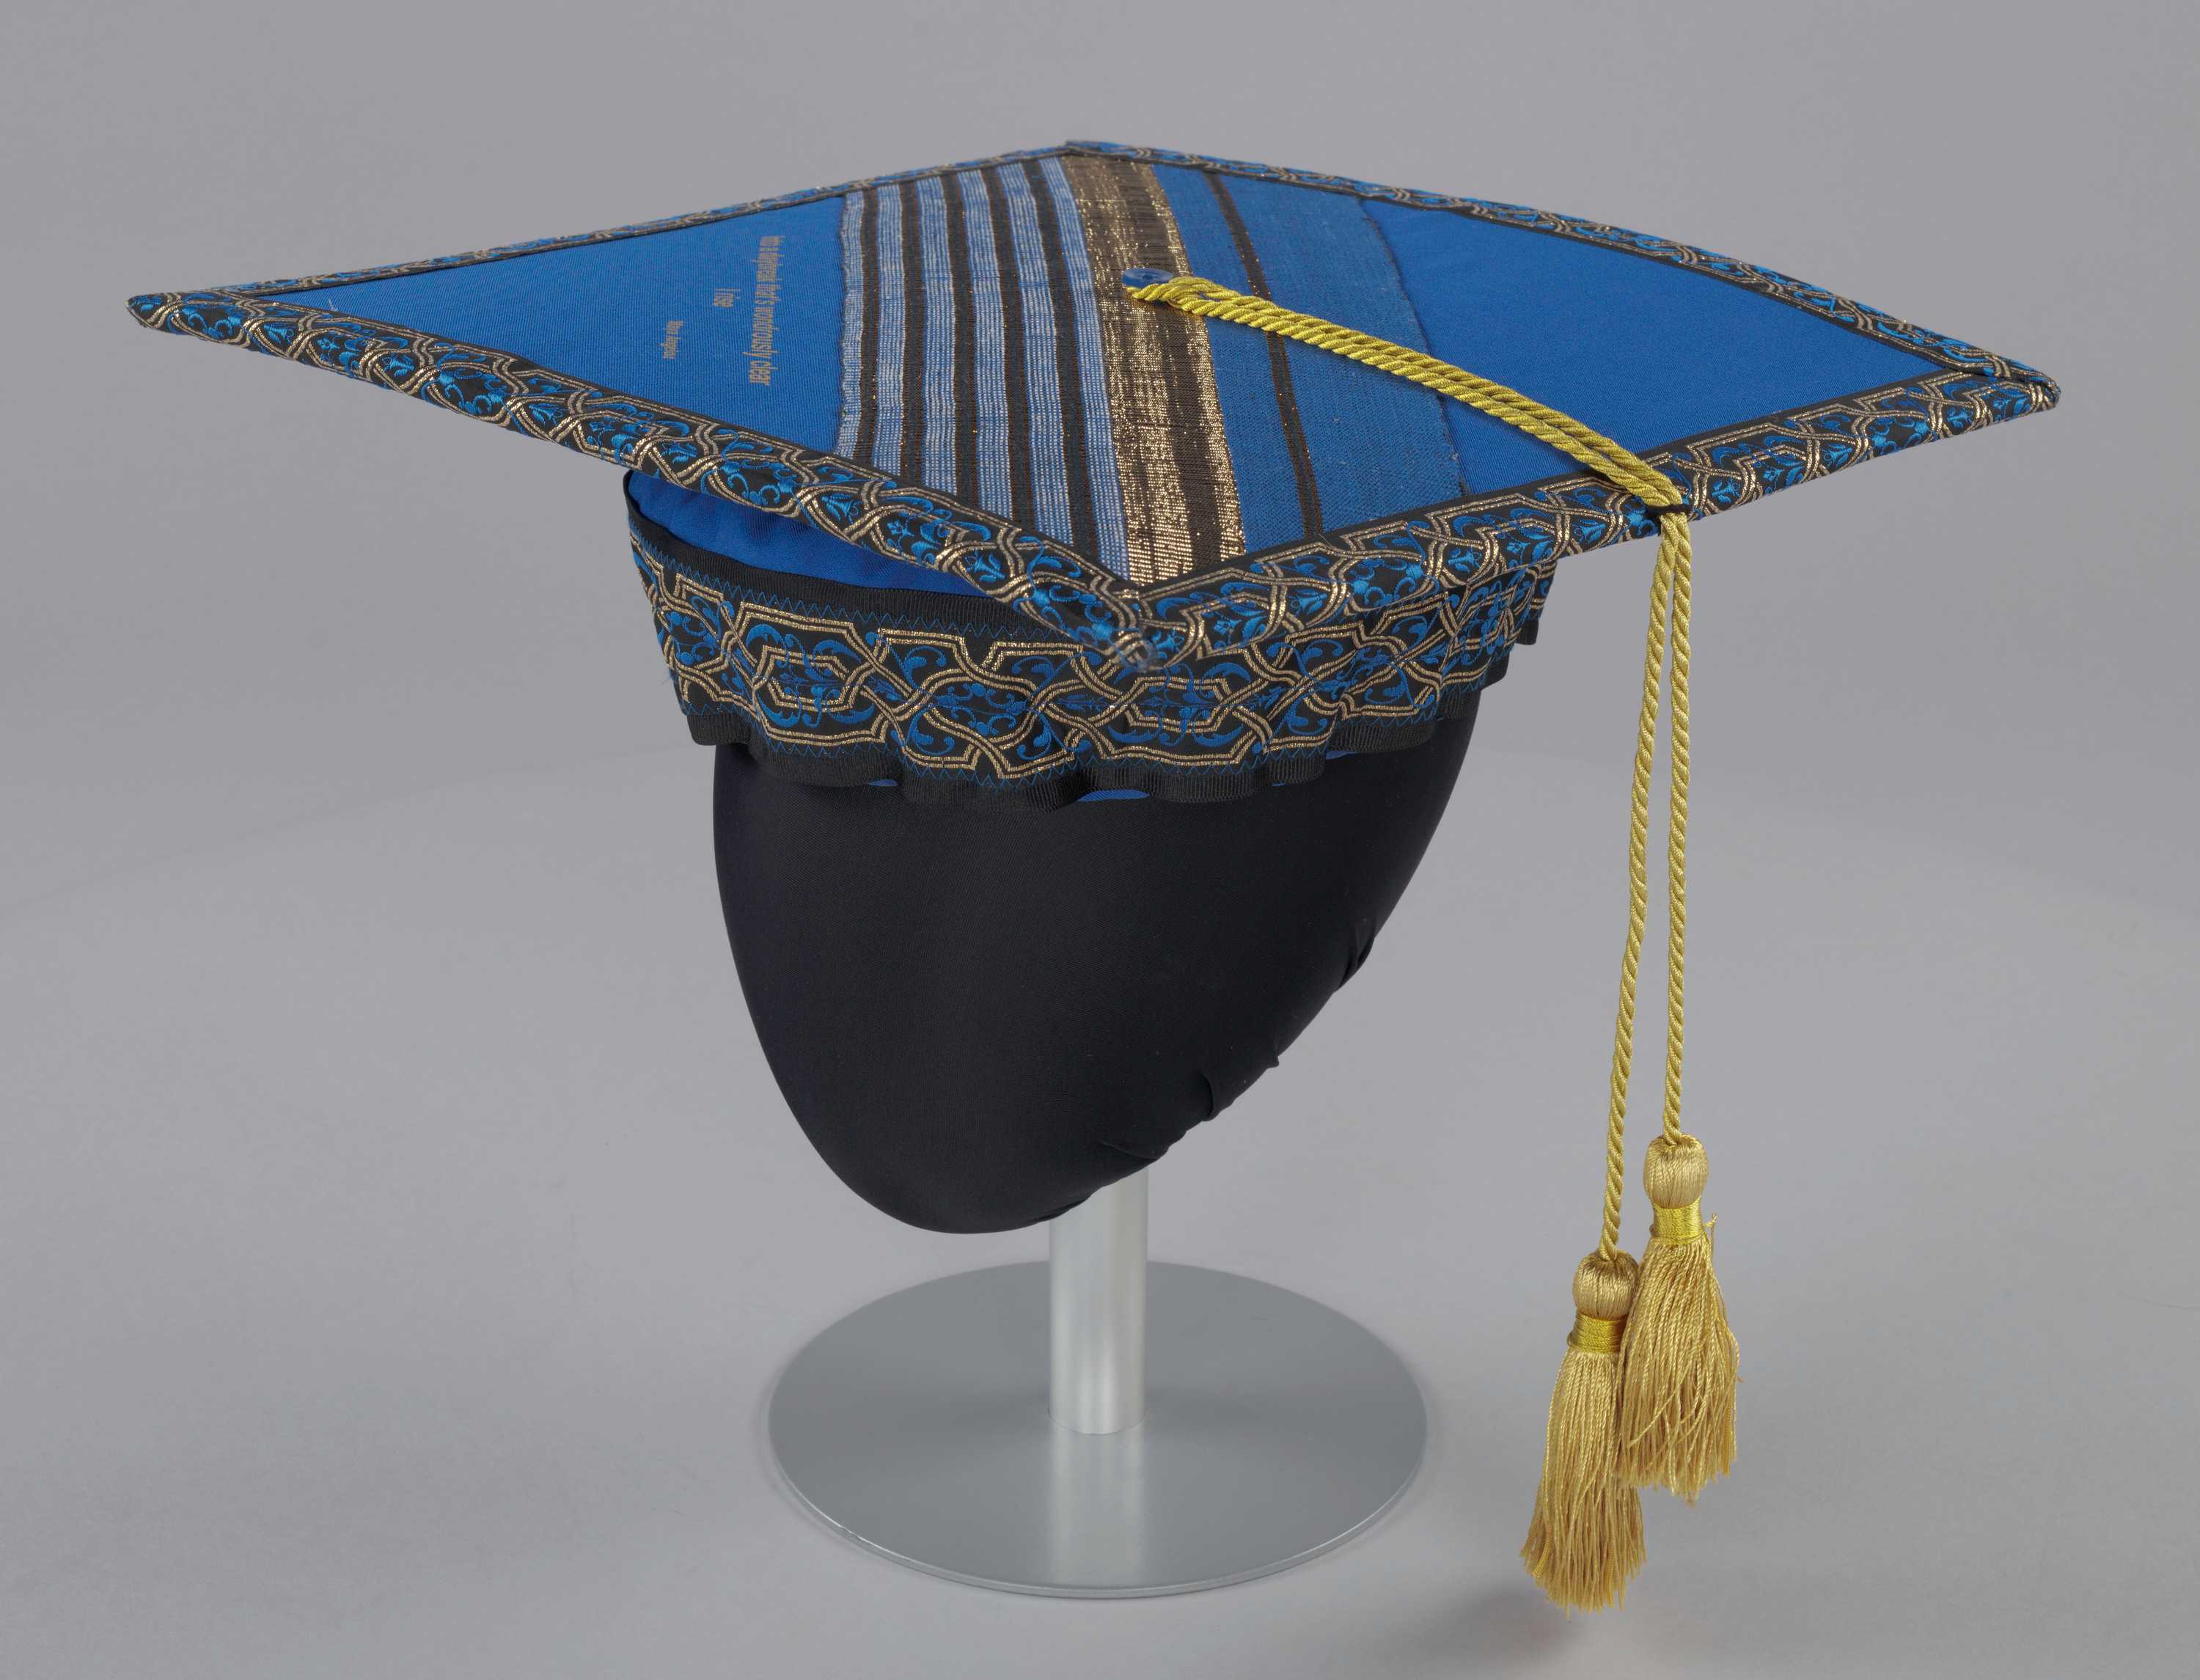 A blue and gold mortarboard cap from Bennett College worn by Dr. Johnnetta Betsch Cole.